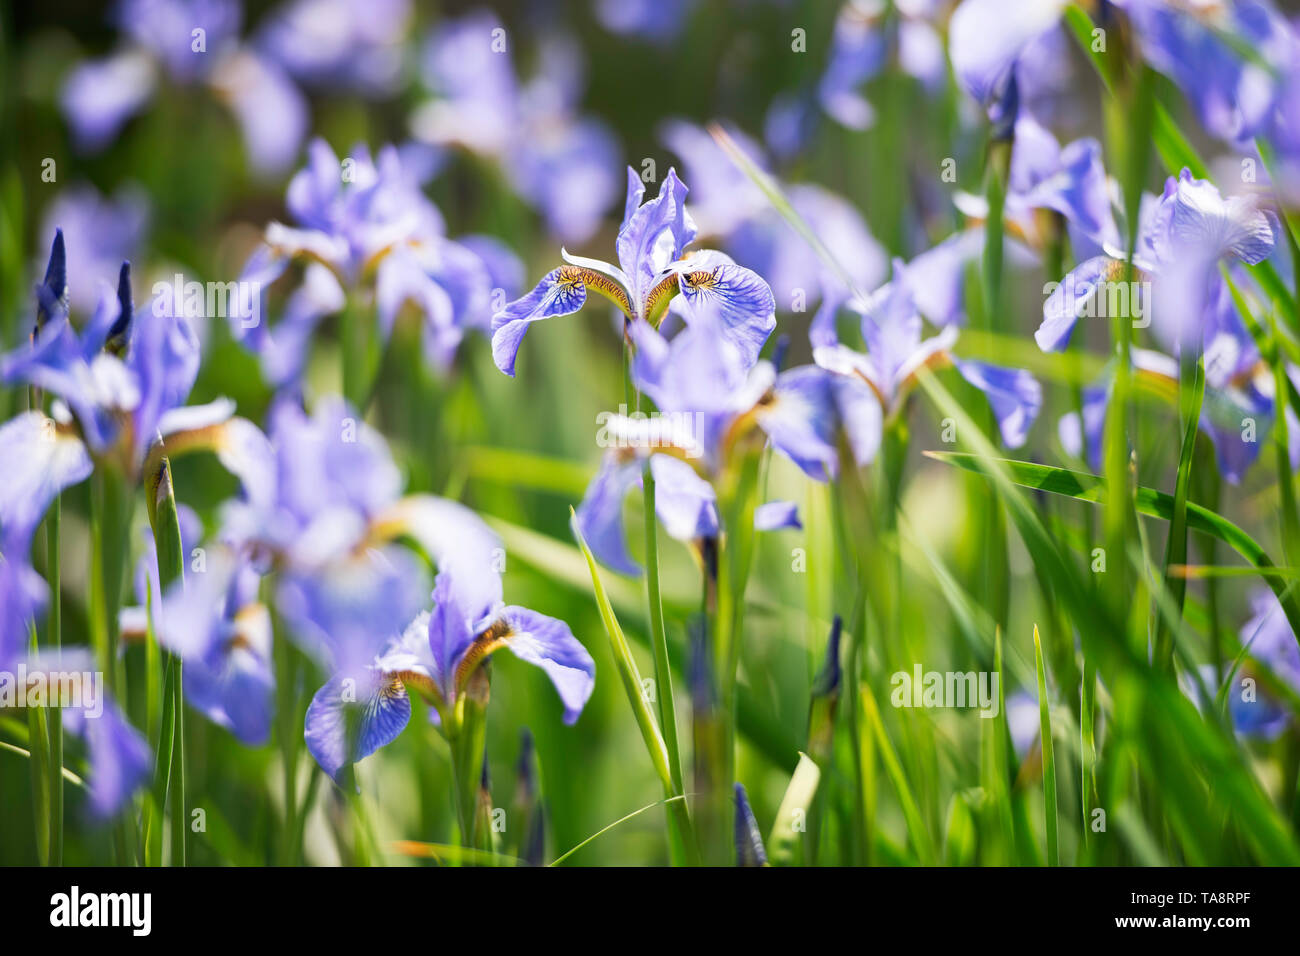 purple iris flowers in a summer garden at a sunny day Stock Photo